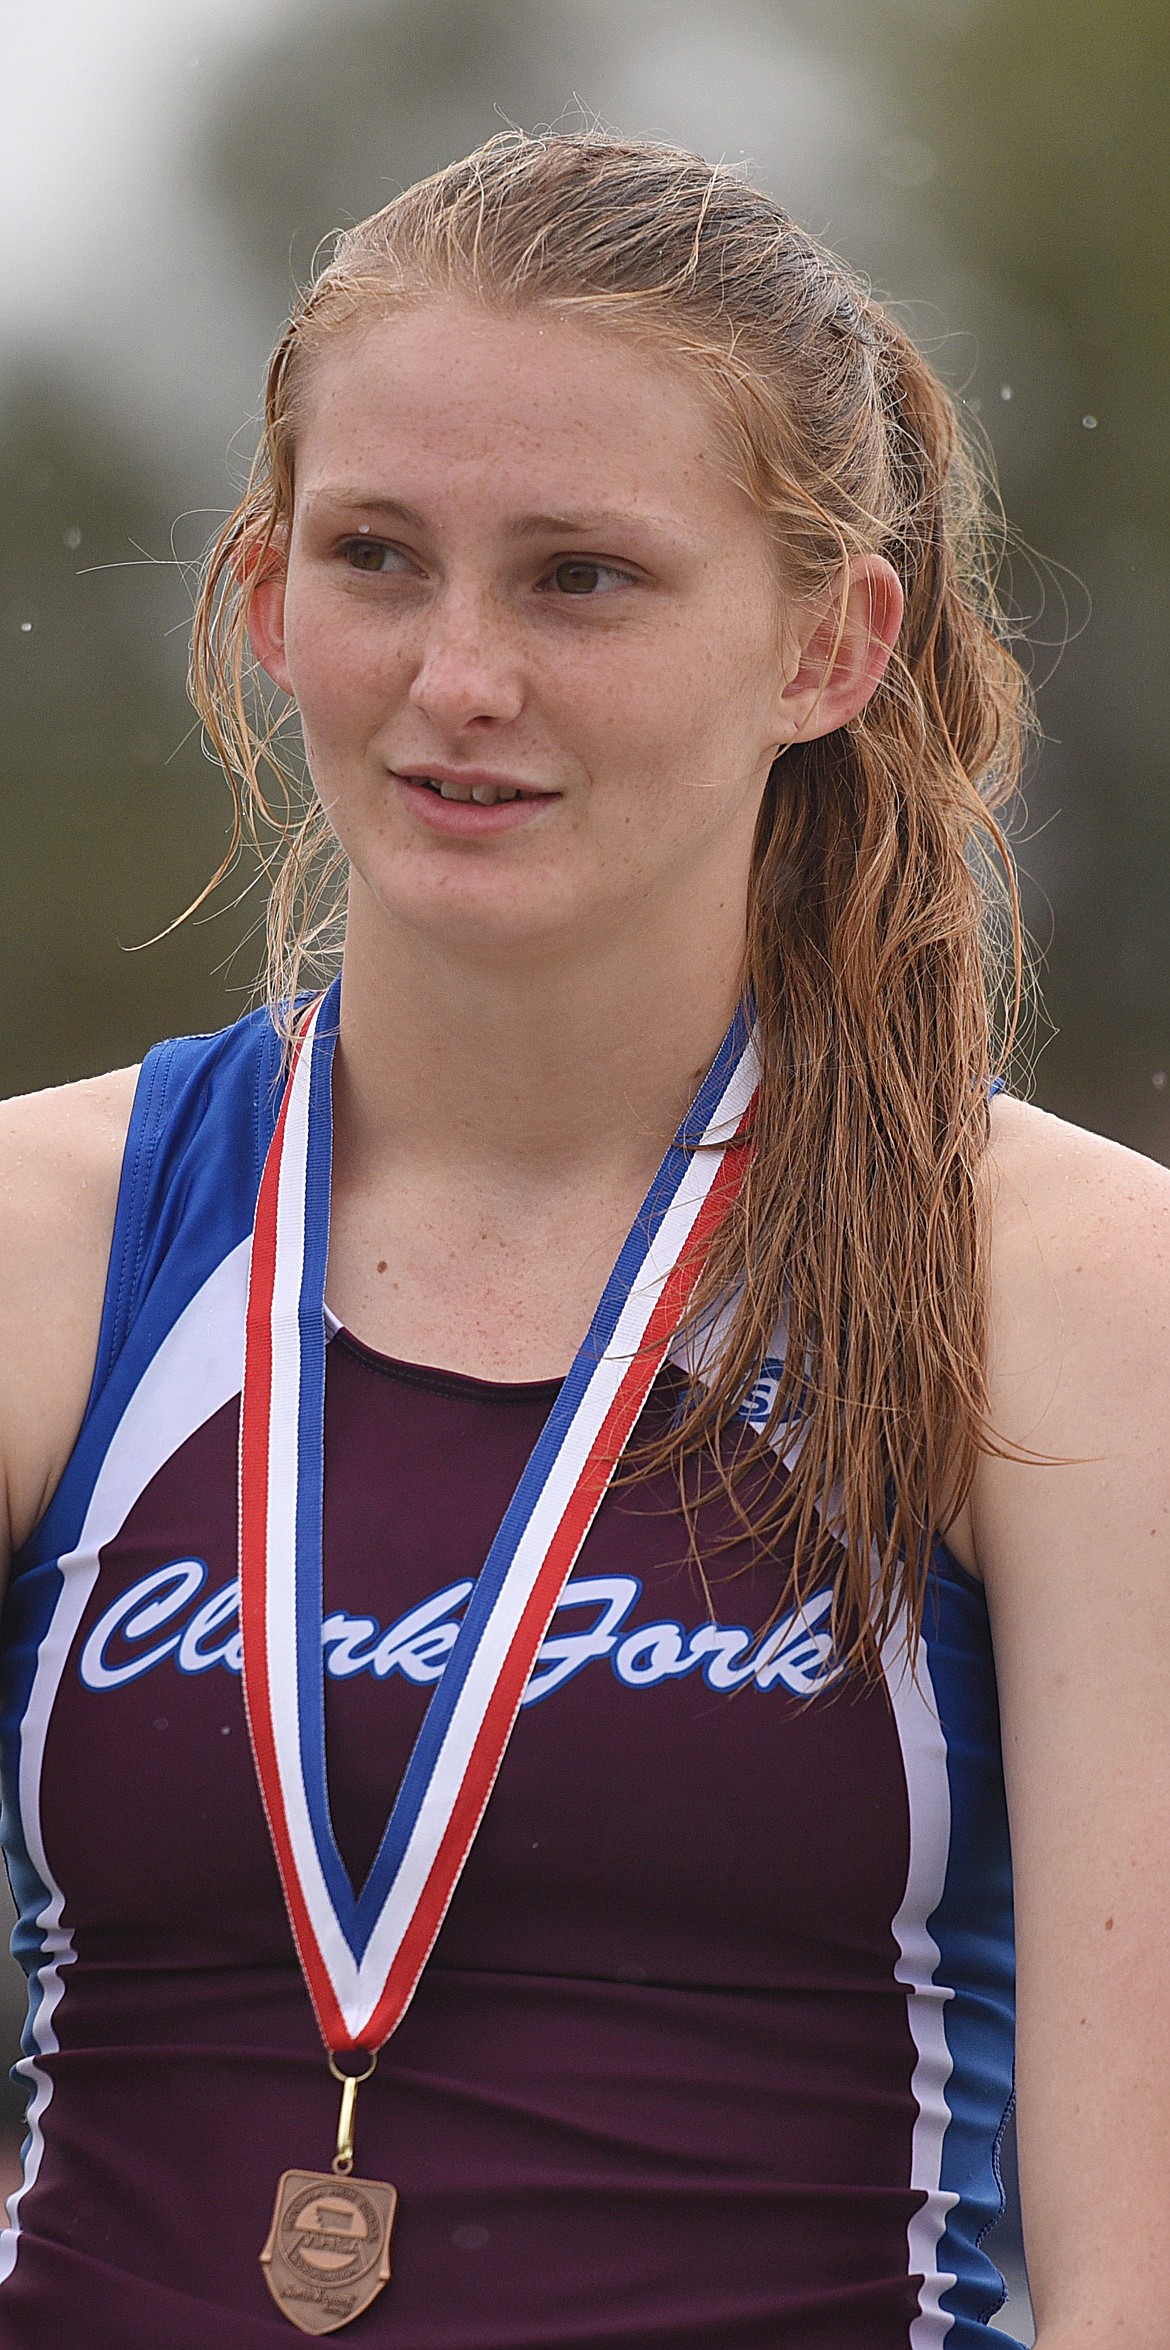 EMMA BAUGHMAN placed fifth in the 300-meter hurdles at Divisionals. (Joe Sova/Mineral Independent)